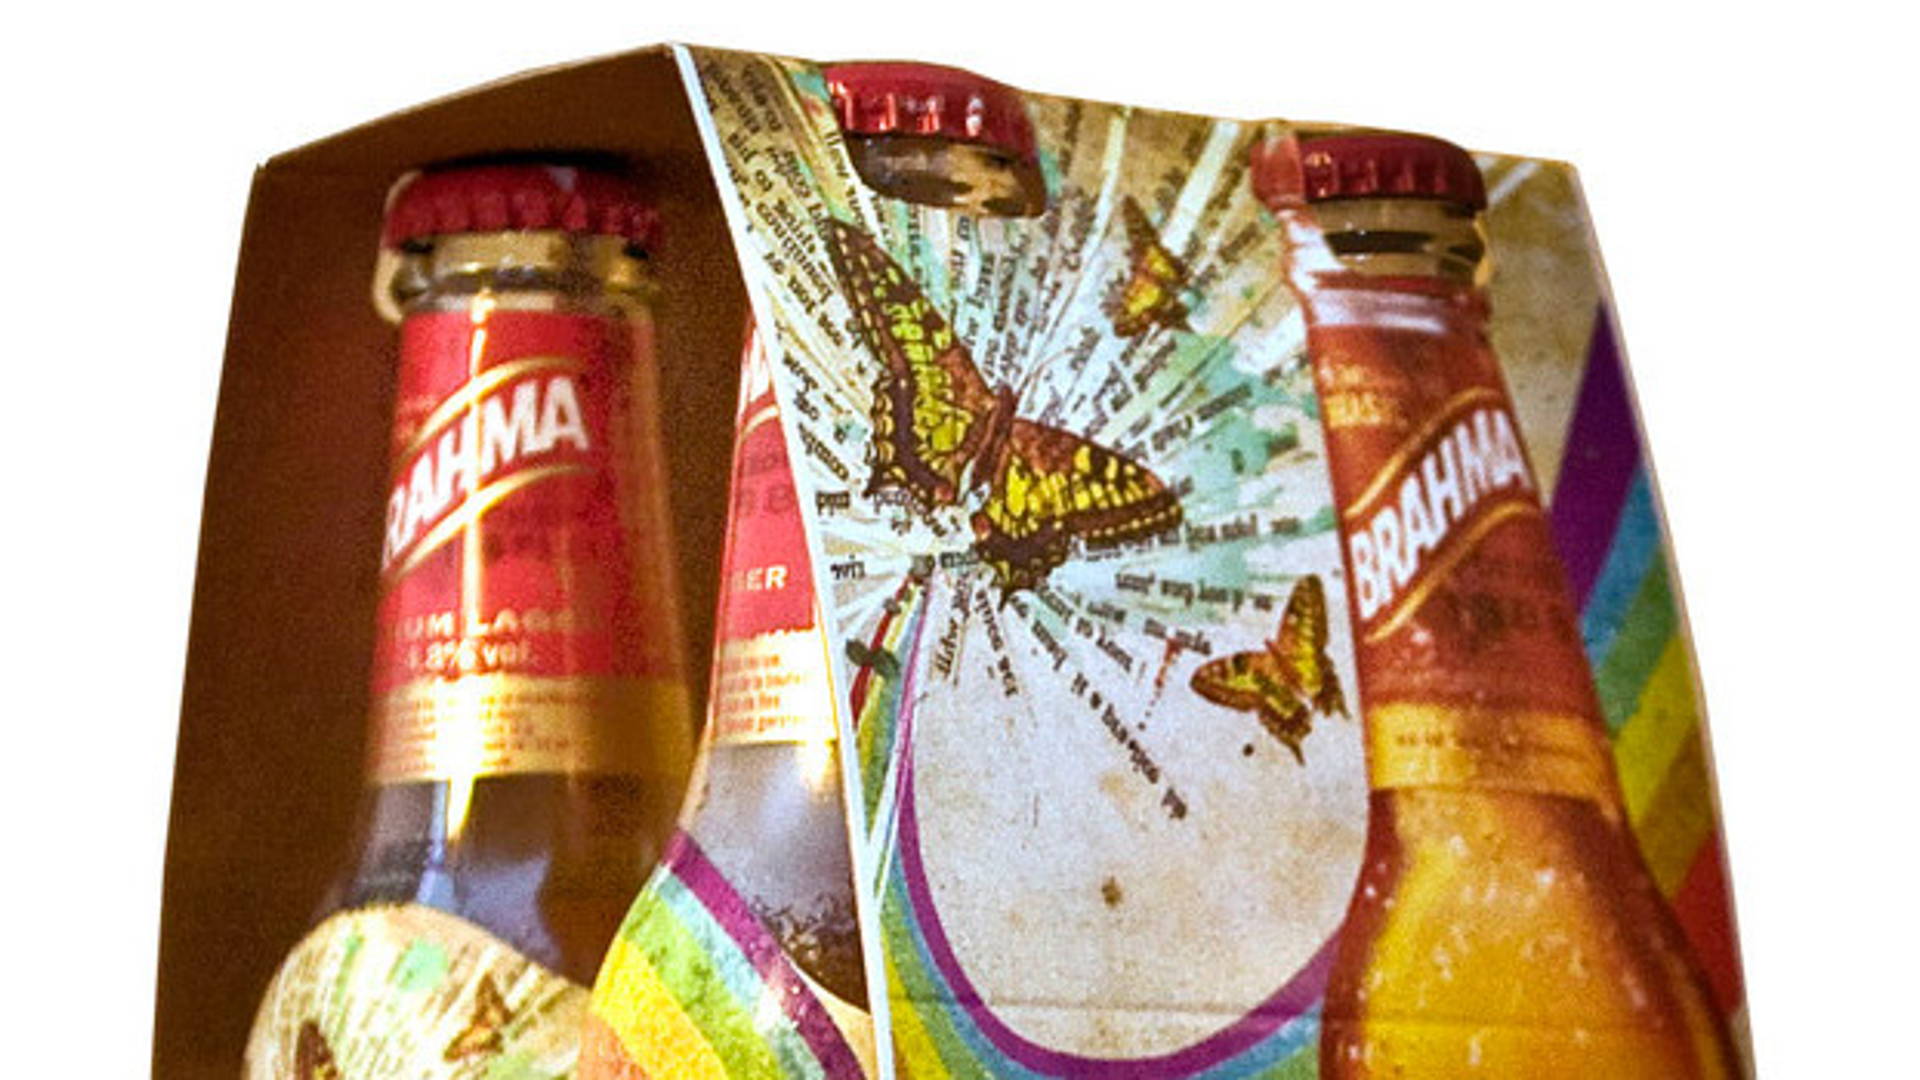 Featured image for Brahma Beer